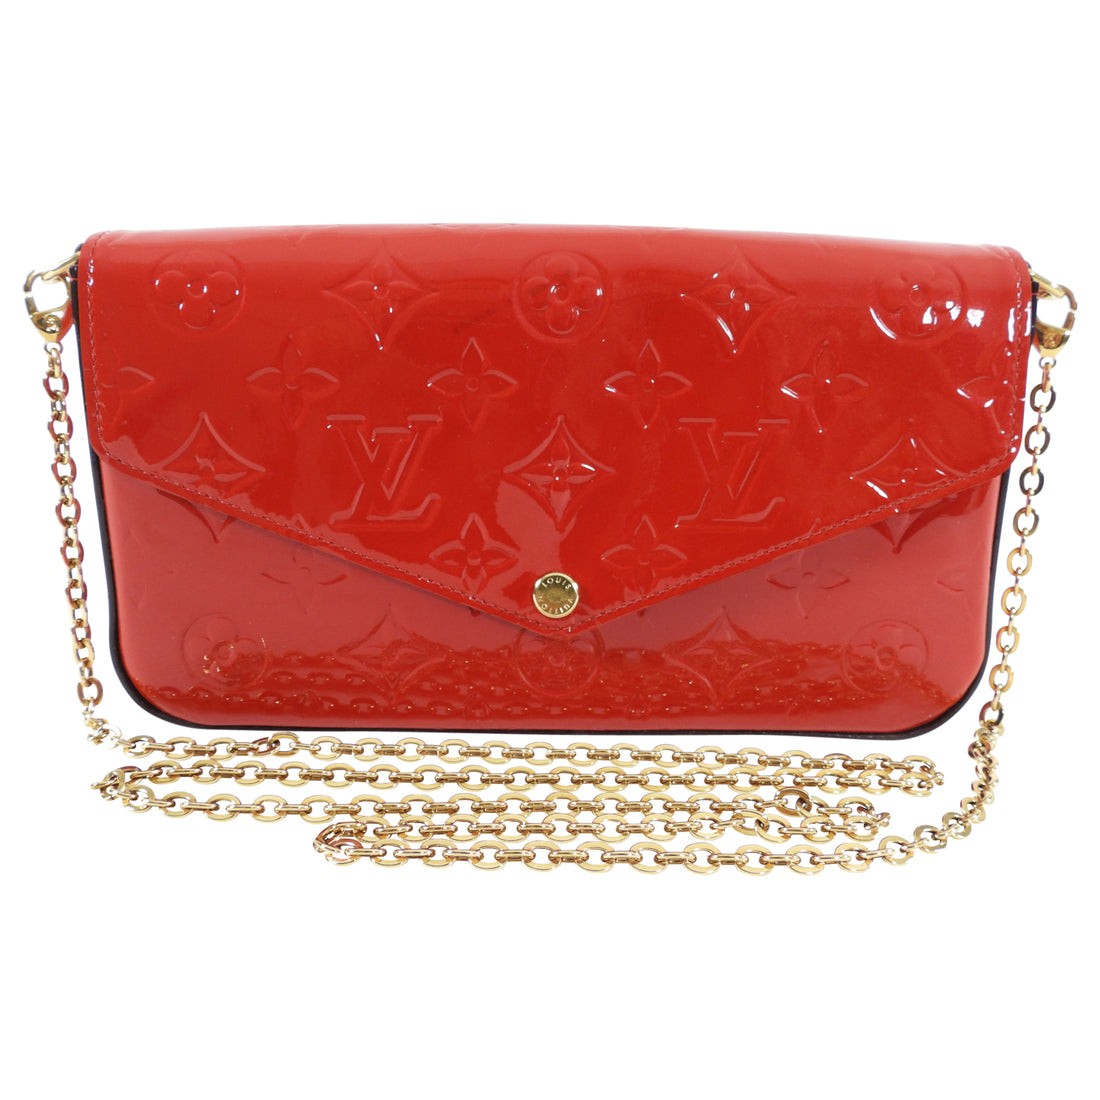 LOUIS VUITTON- Red patent leather bag in its pouch, circ…